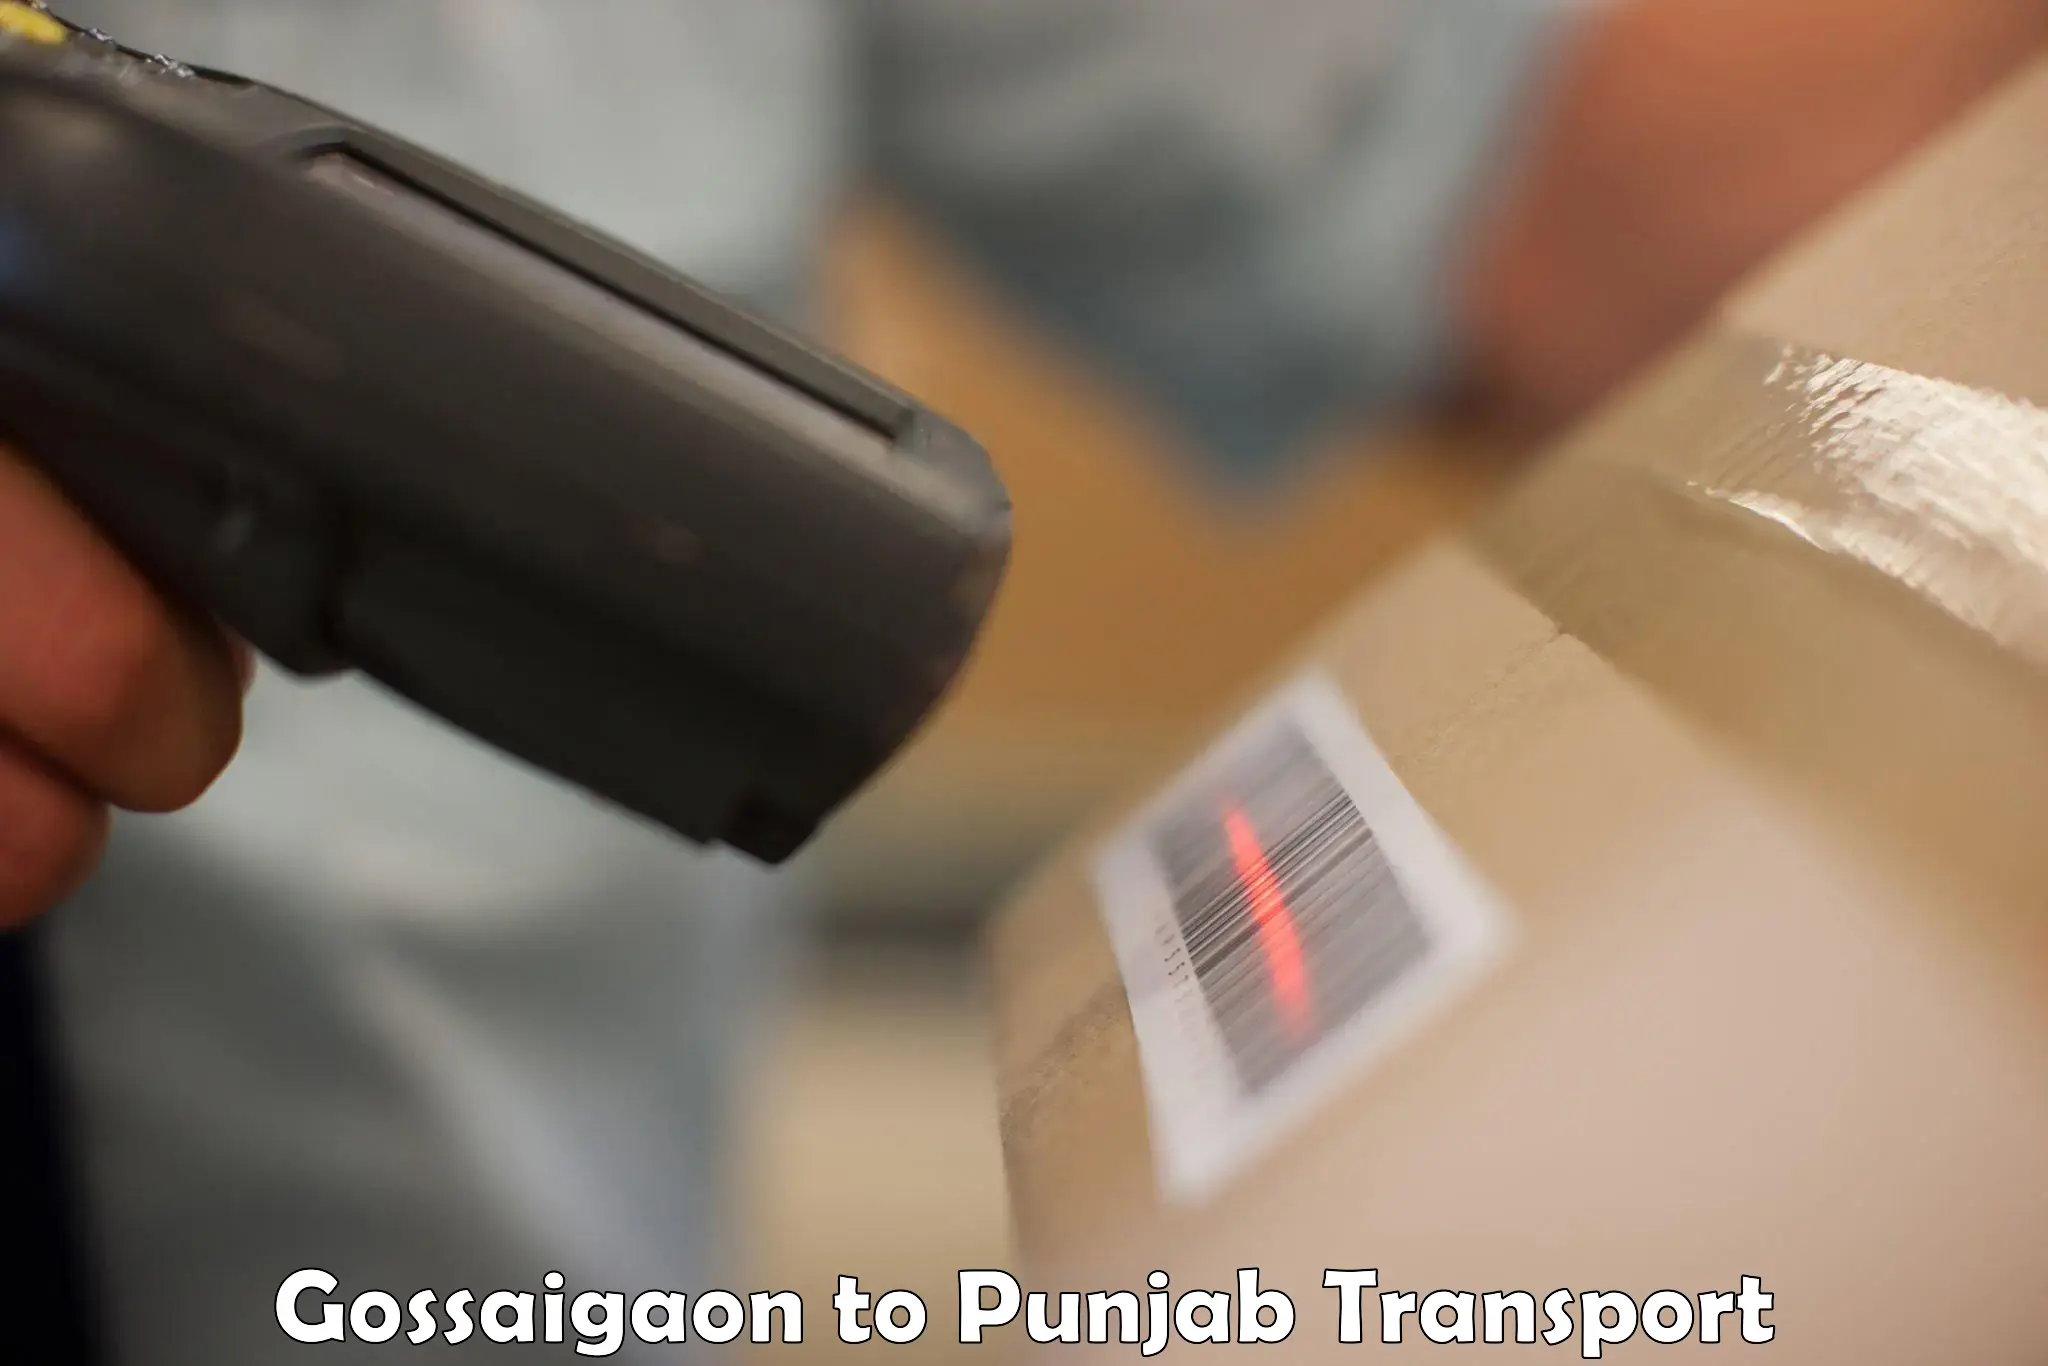 Delivery service Gossaigaon to Punjab